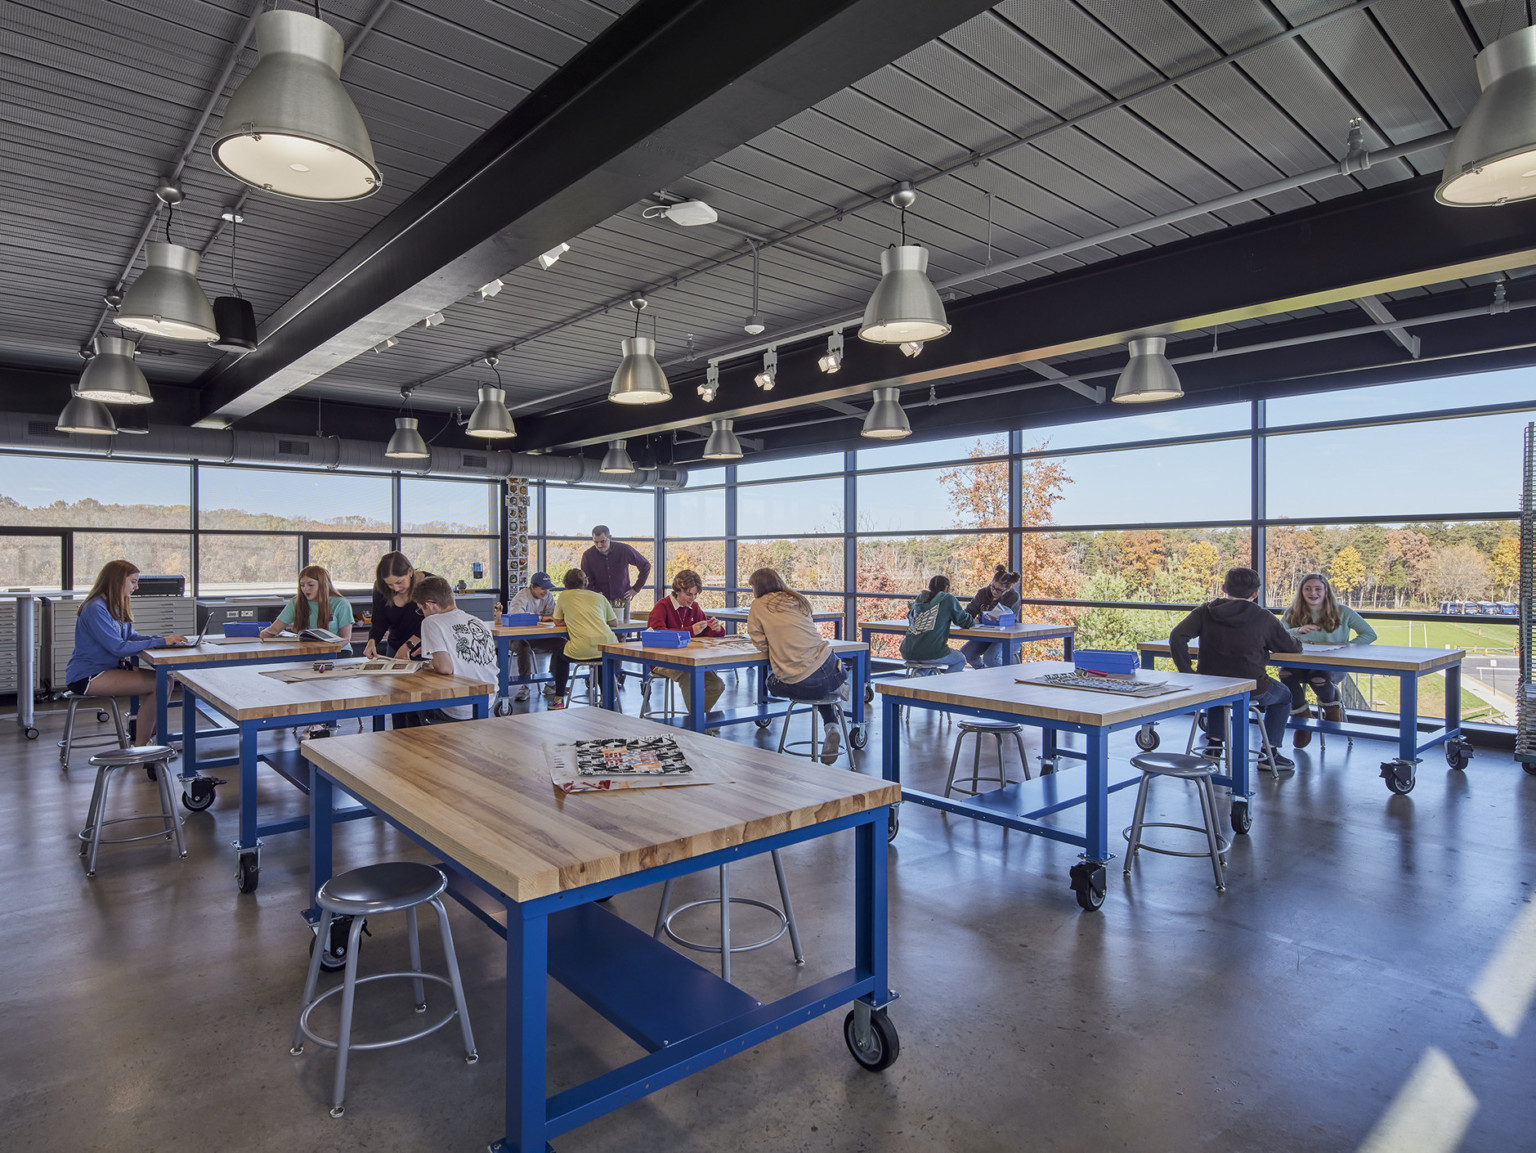 industrial tech classroom where students collaborate over movable tables with views to forest by floor to ceiling windows